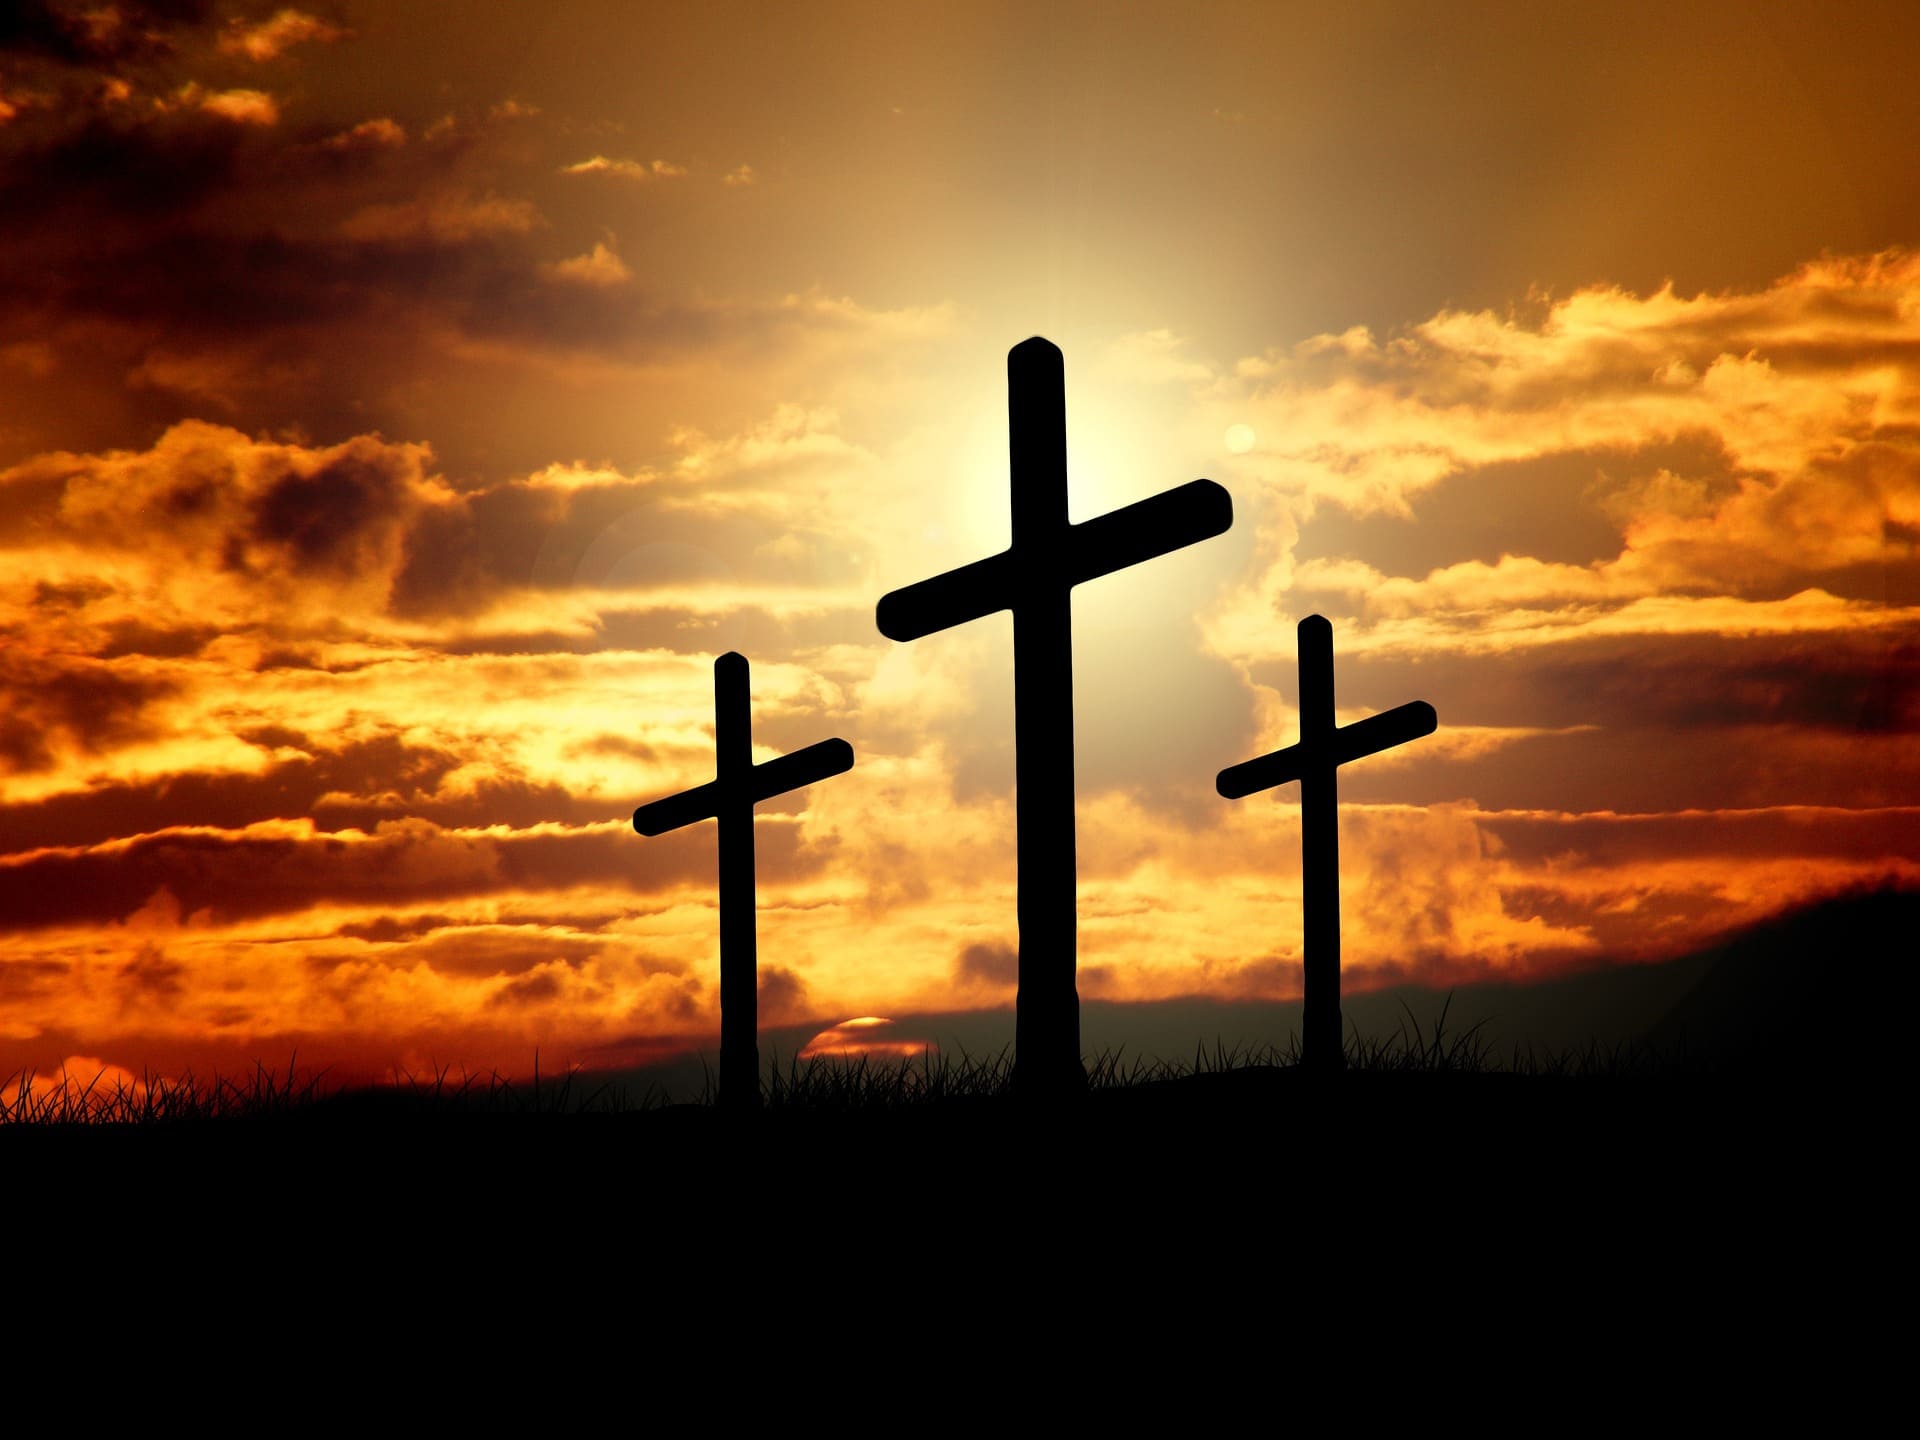 3 crosses silhouetted at sunset